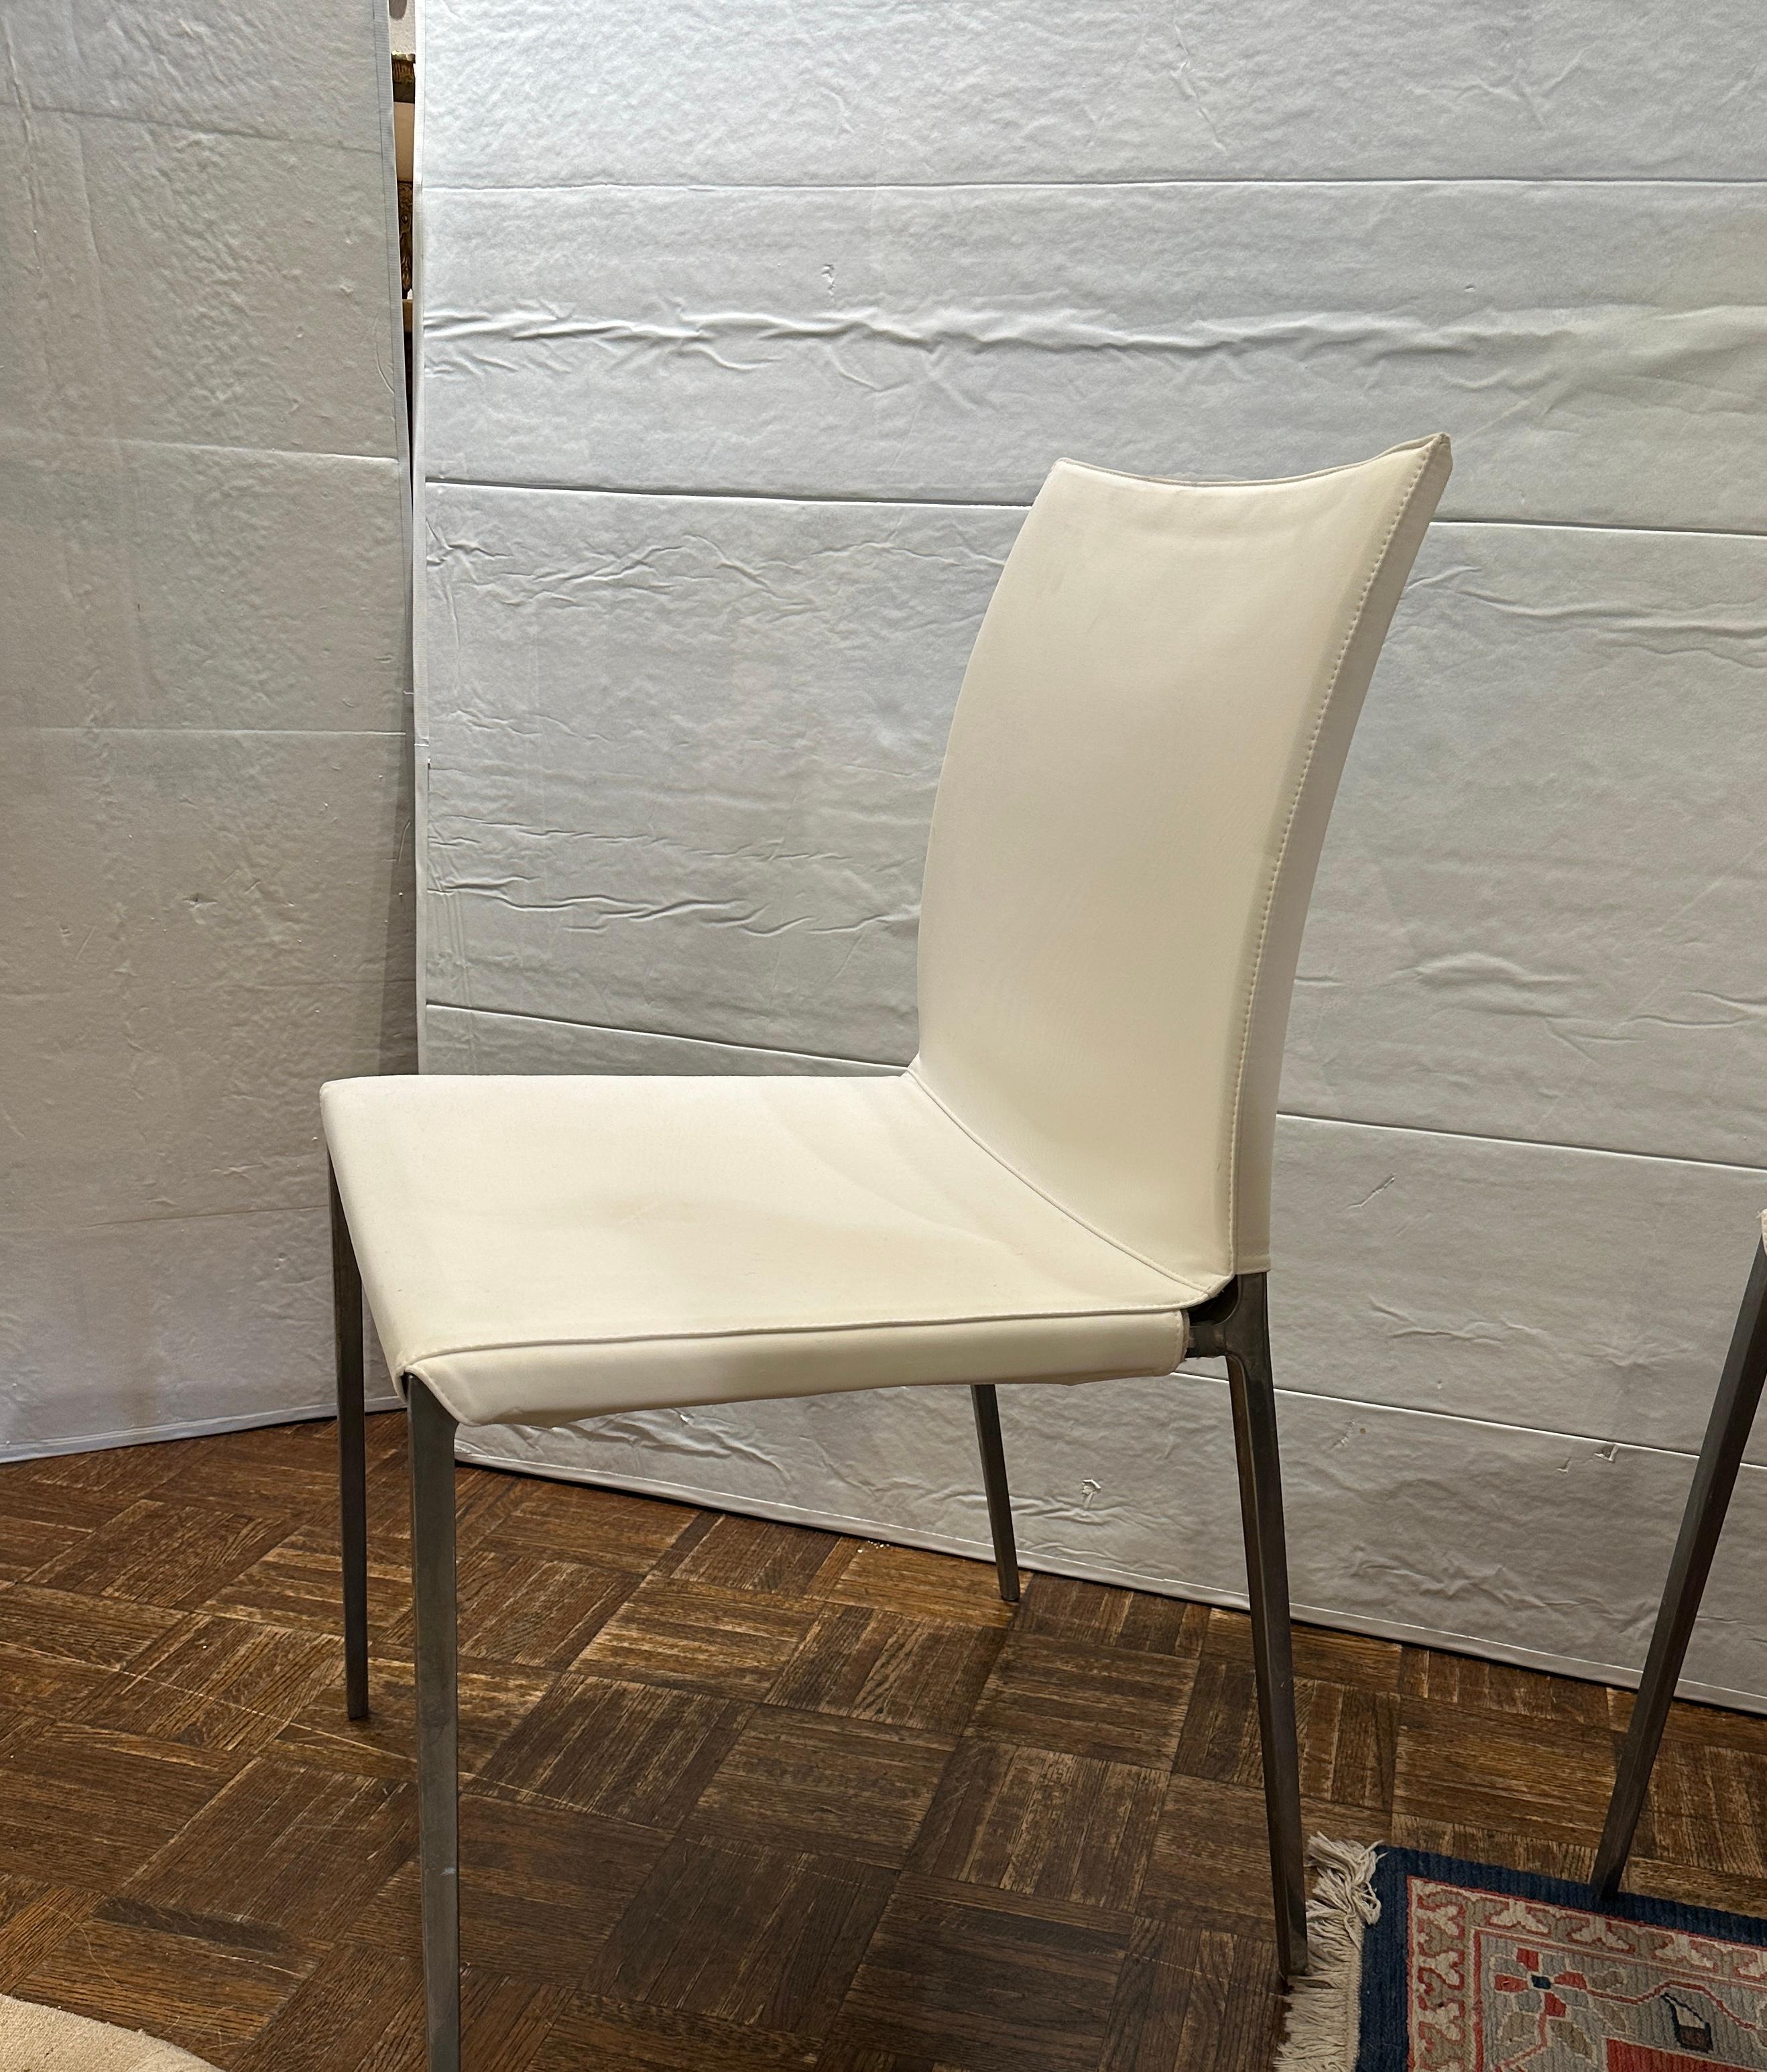 Set of 4 Zanotta, designed by Roberto Barbieri, Mid Century style, chrome legs dining chairs.  Seat and back is in  white removable woven canvas covers.  Very comfortable seatings.
Includes Four other white slipcovers.